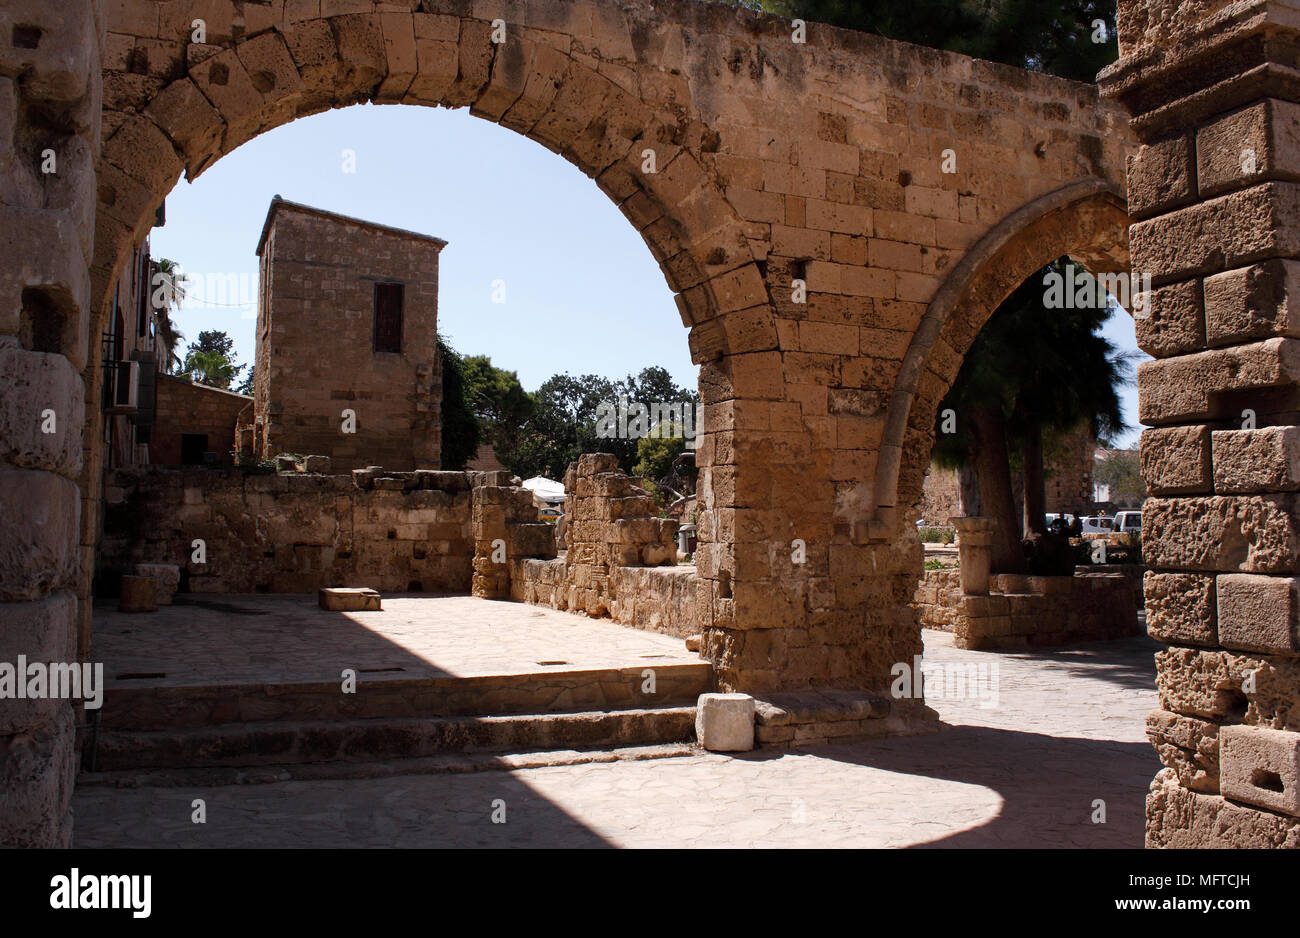 THE VENETIAN PALACE RUINS. FAMAGUSTA NORTHERN CYPRUS Stock Photo